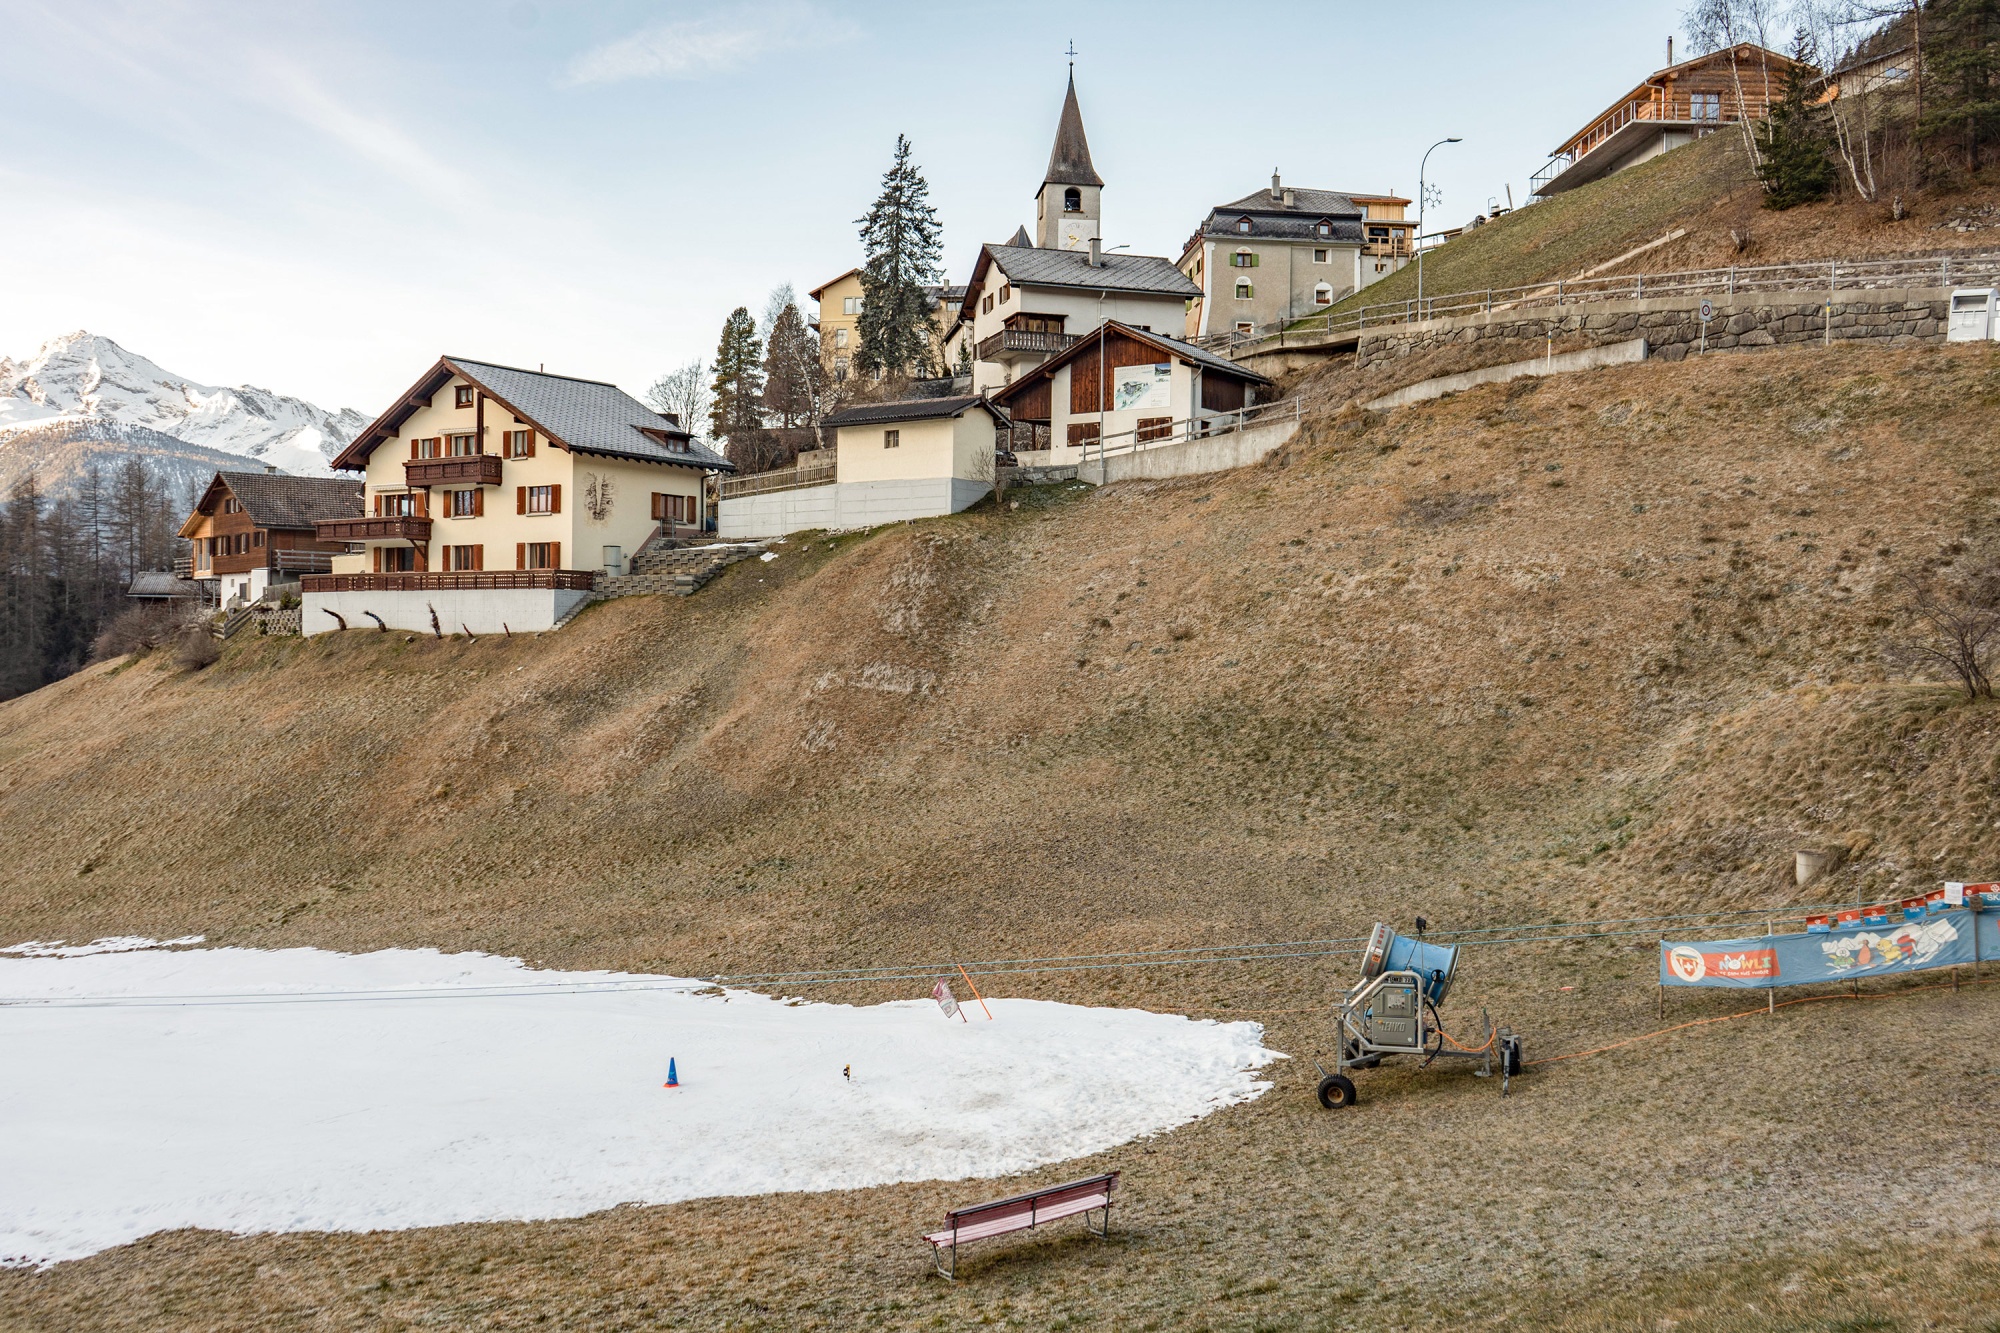 Snow Golf? In Switzerland, Where the Greens Are White - The New York Times